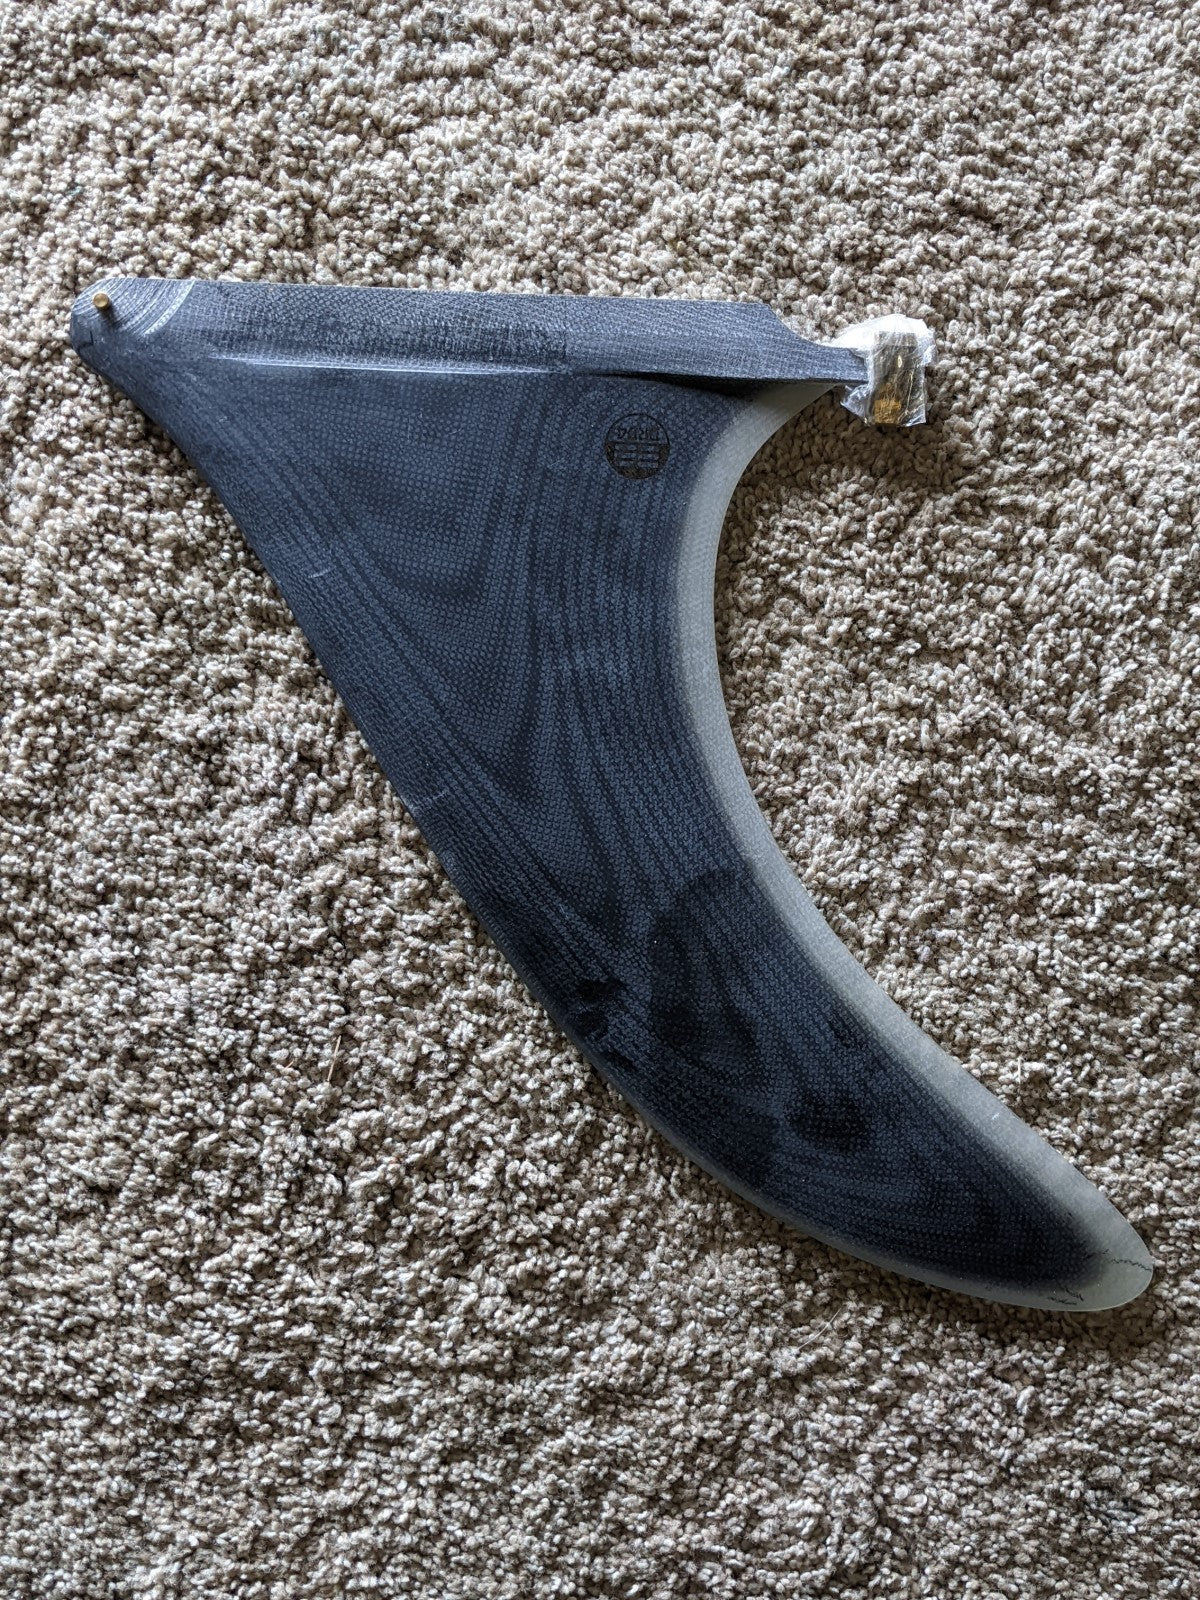 A Joel Tudor Classic. One of the older templates in the Joel Tudor family of fins. Big honker, with a wide base and heavy rake.   Check out more at DRD4 Fin Company!